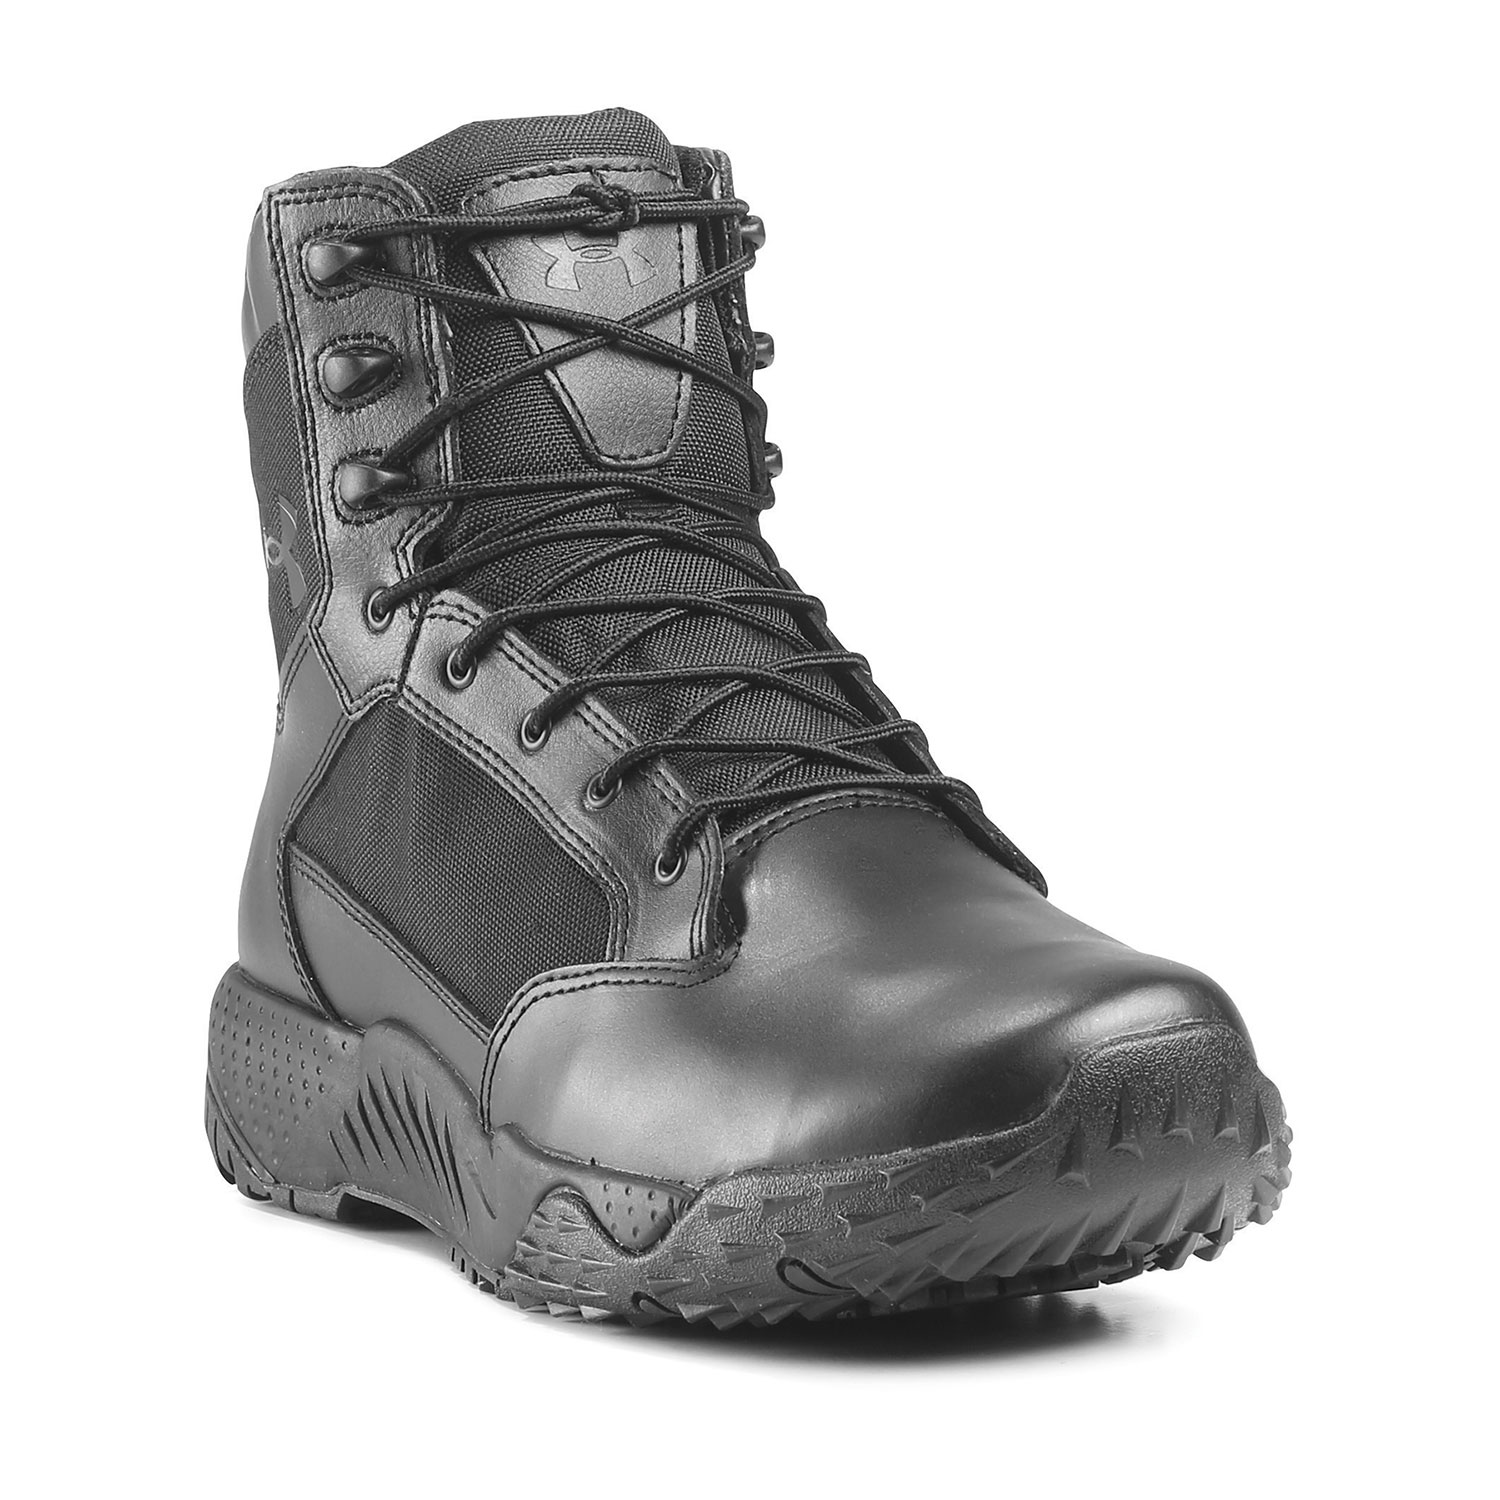 Detail Under Armour Firefighter Boots Nomer 3